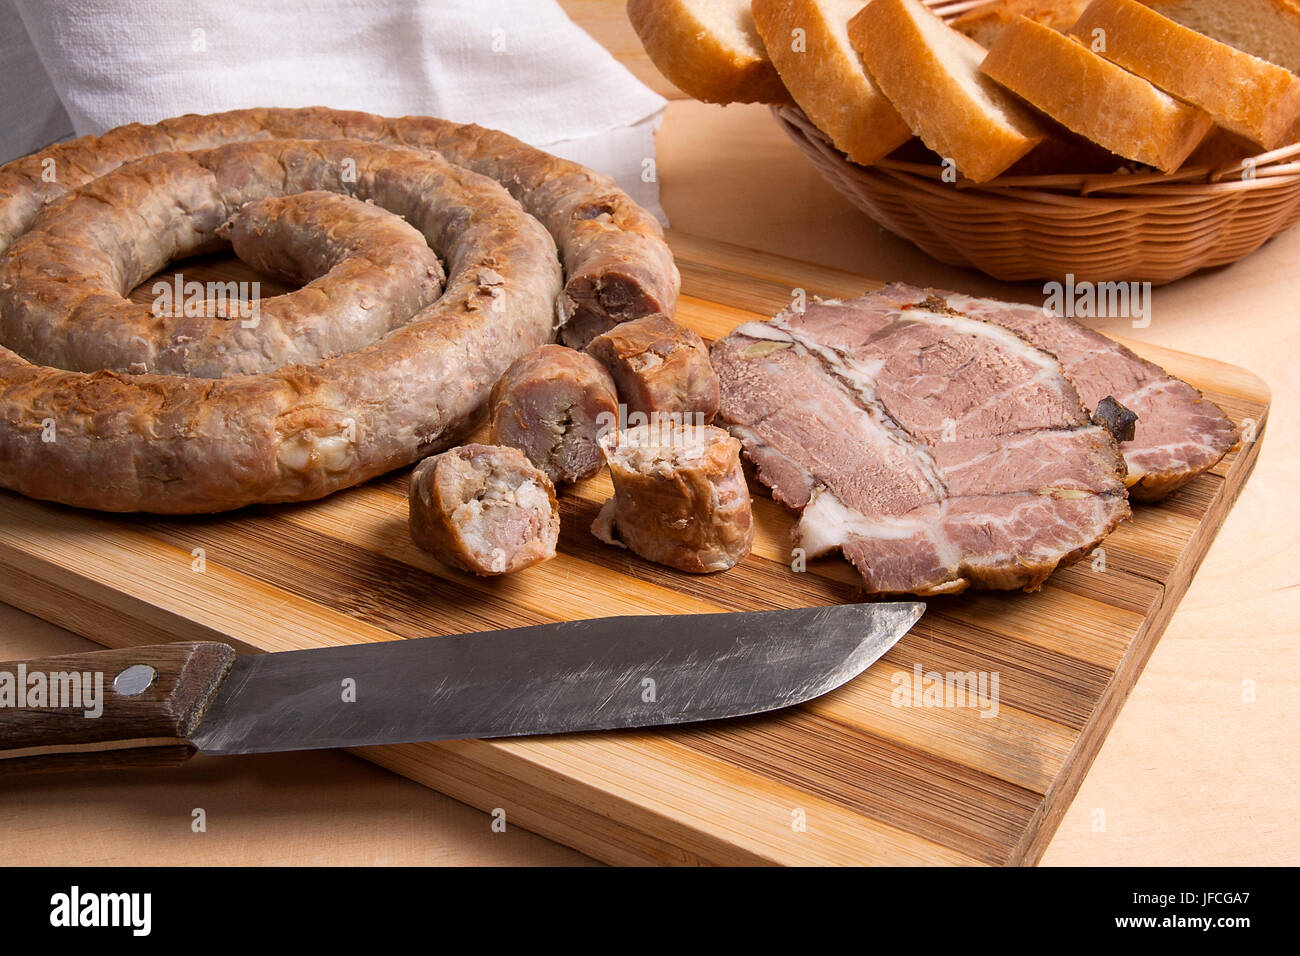 Roasted traditional homemade sausage with spices and herbs and slices spicy meat baked with herbs and spice on wooden cutting board. Slices white whea Stock Photo